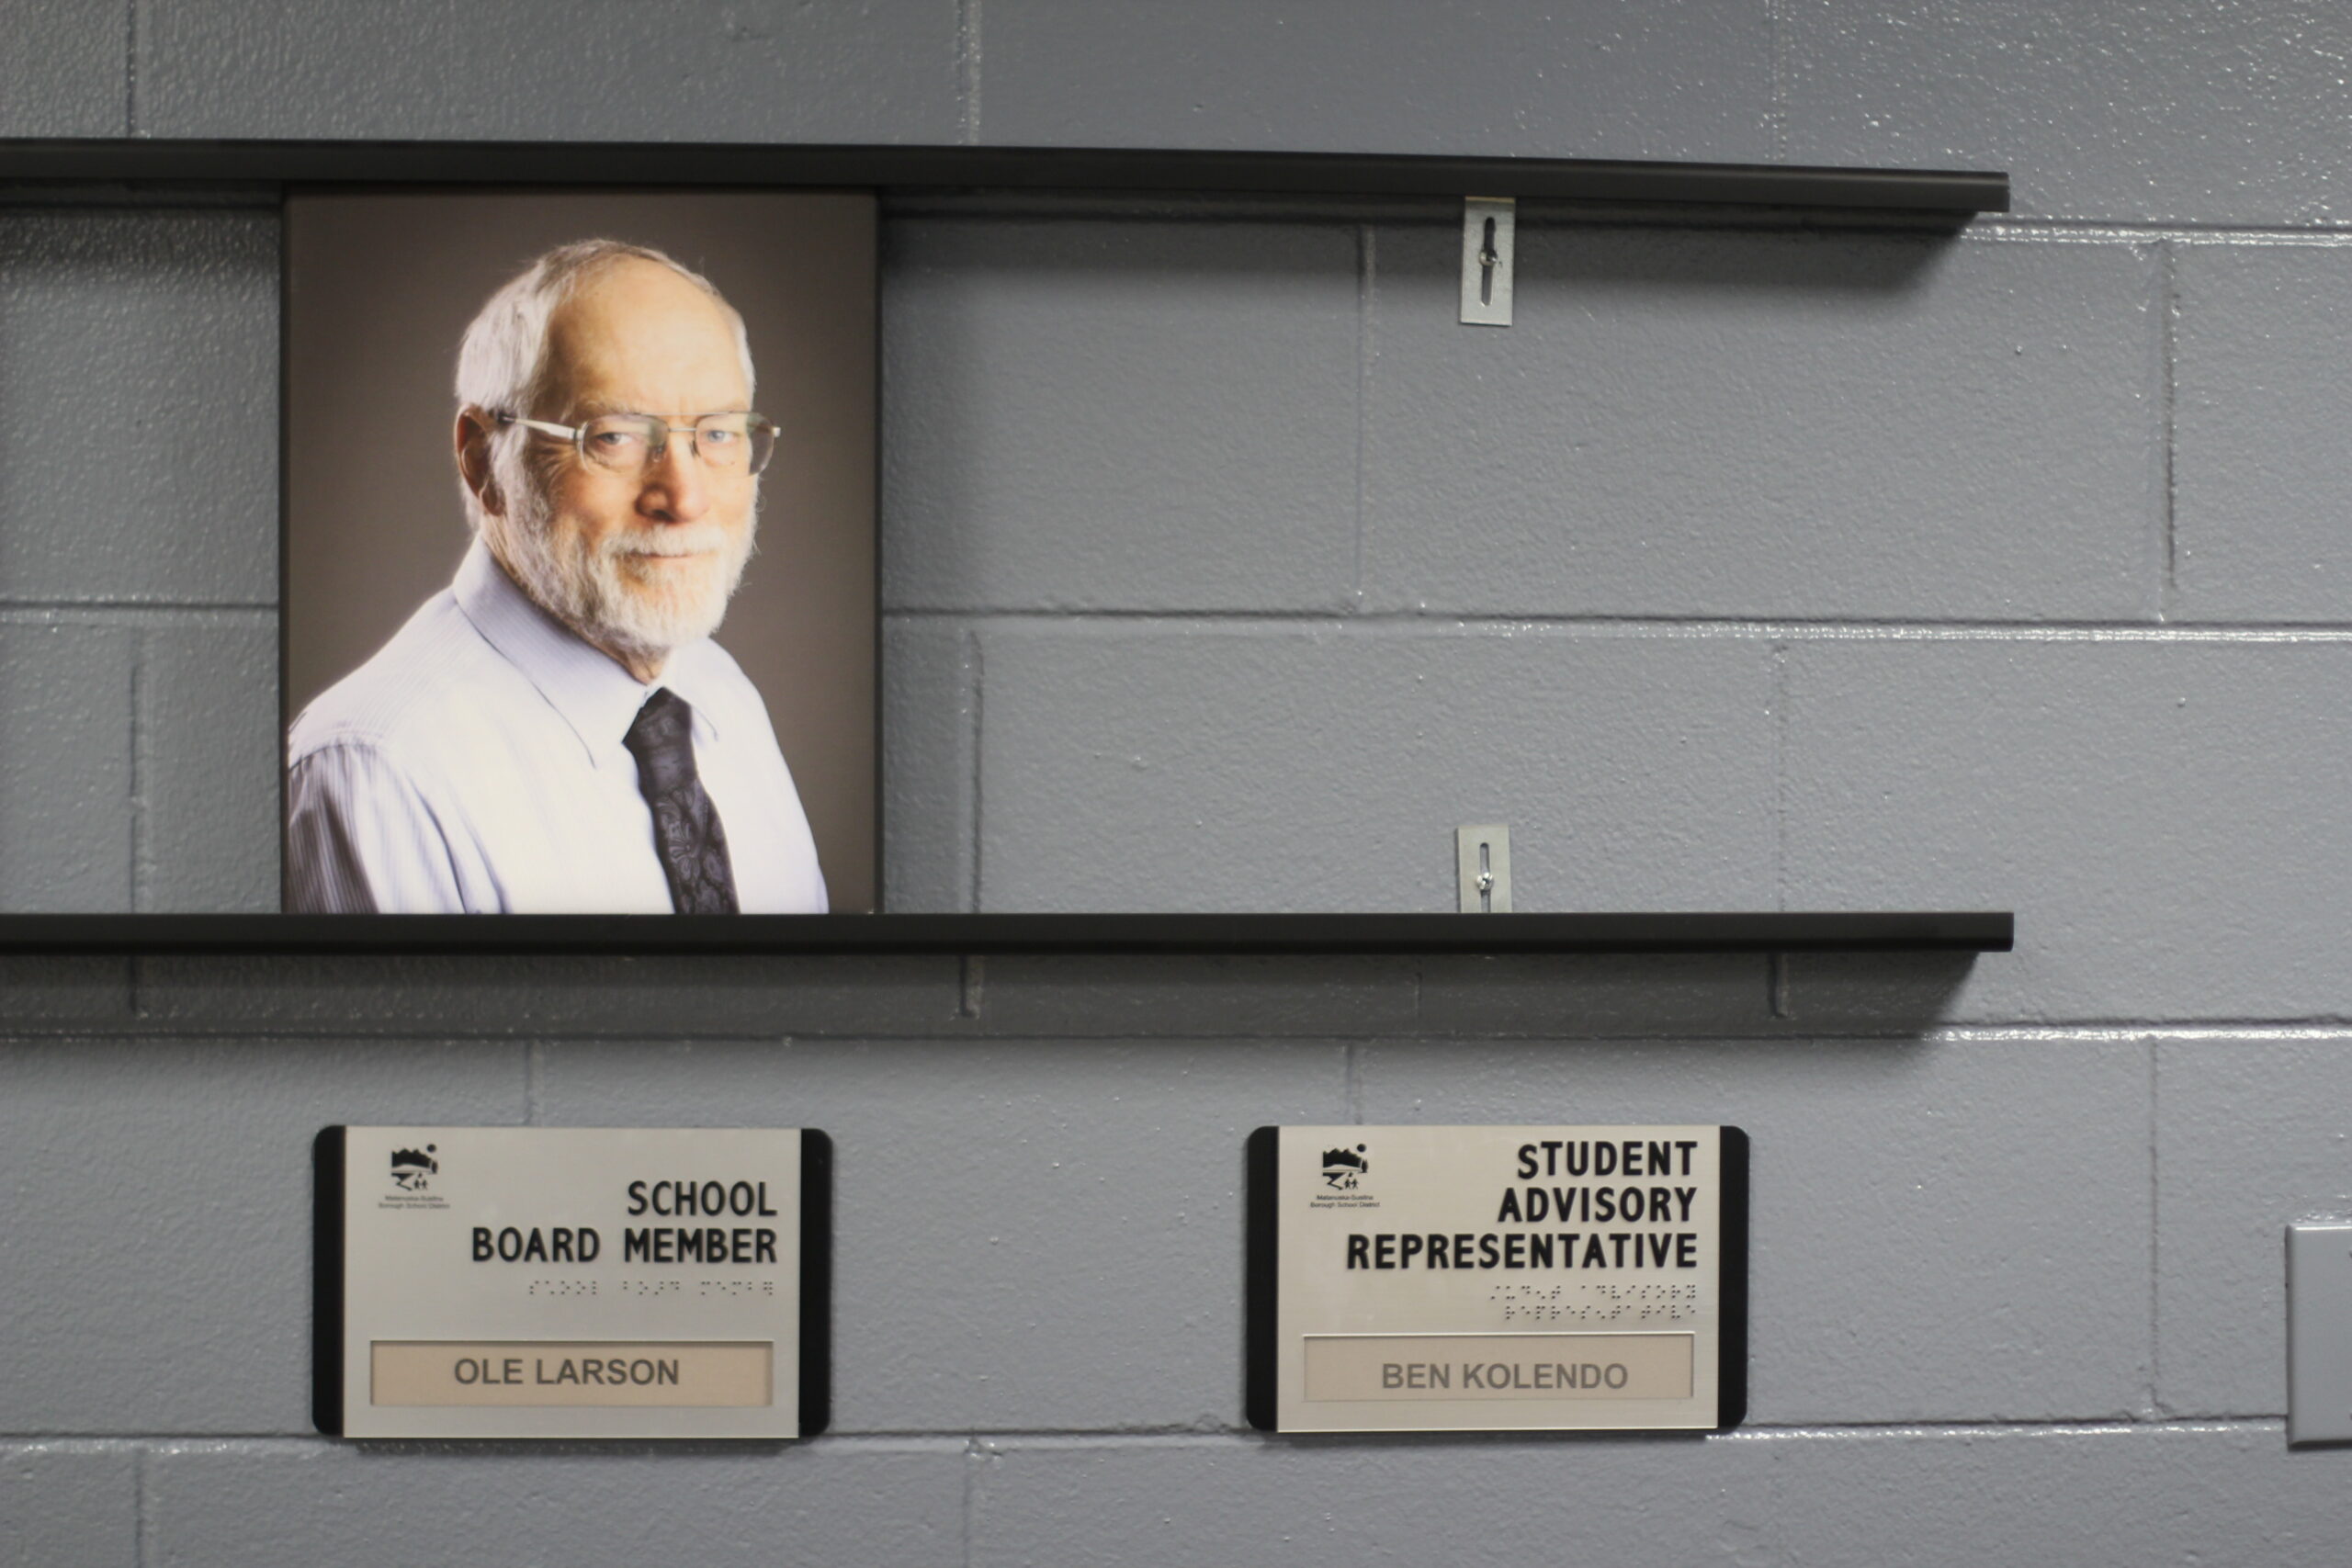 A photo of a school board member next to an empty spot where a photo of a student representative would go.